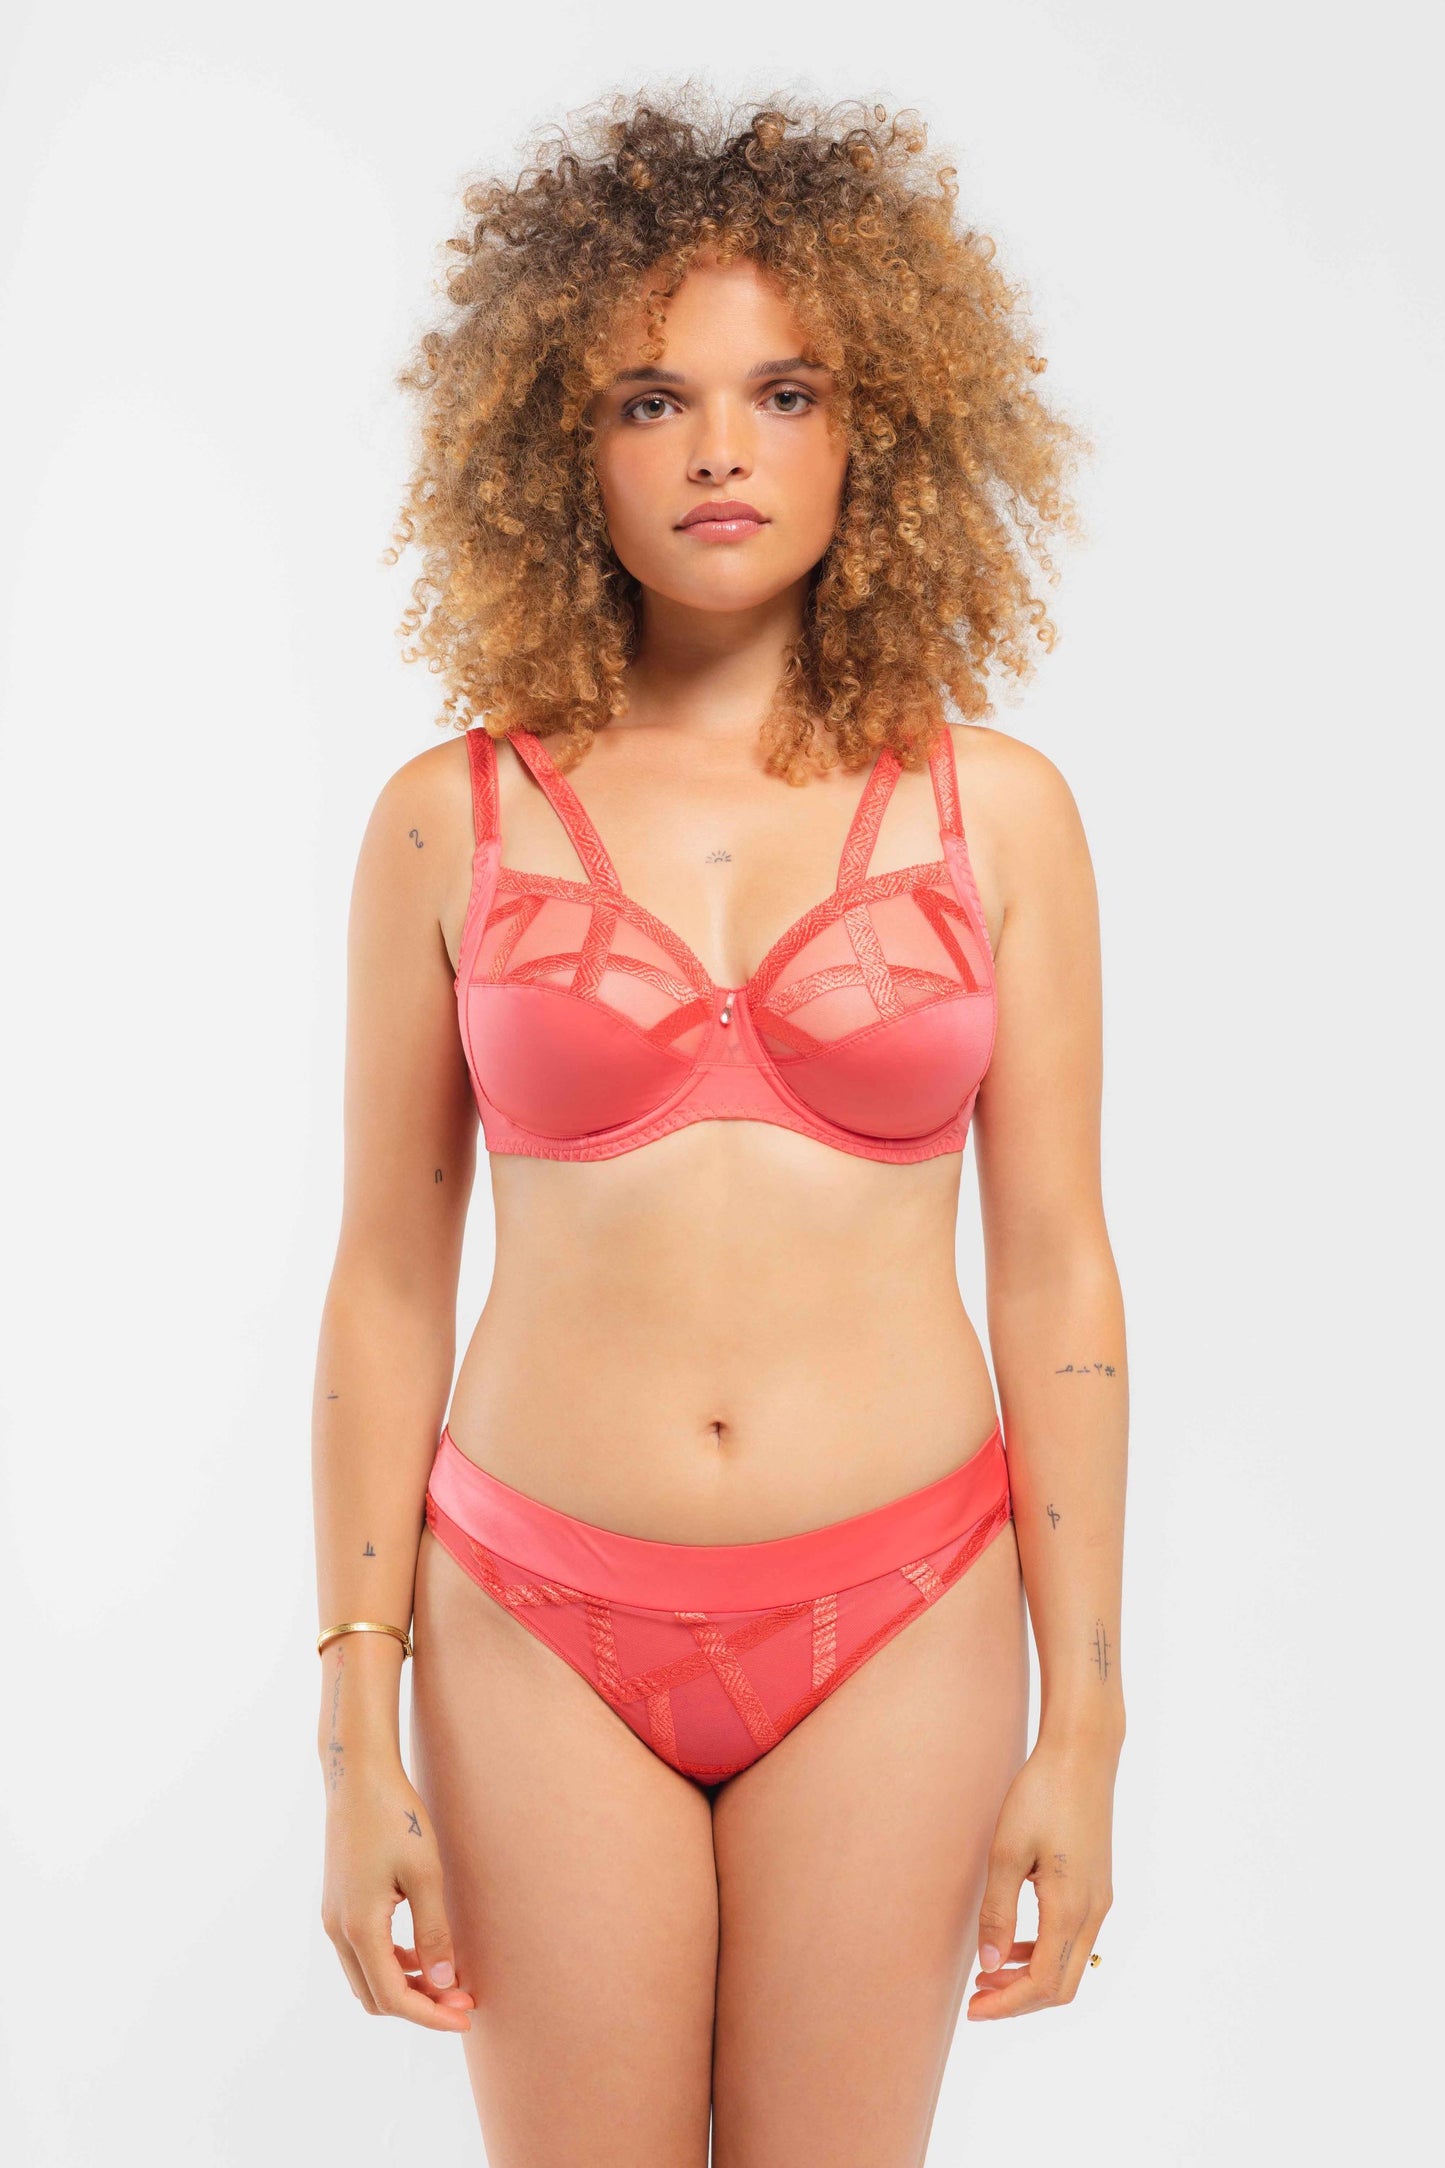 This brief from the Série line of Louisa Bracq includes an eye-catching combination of embroidery and semi-transparent tulle, offering an aesthetically pleasing and stylish look. Its lightweight, smooth and luxurious fabric ensures an optimal, comfortable fit for all sizes.